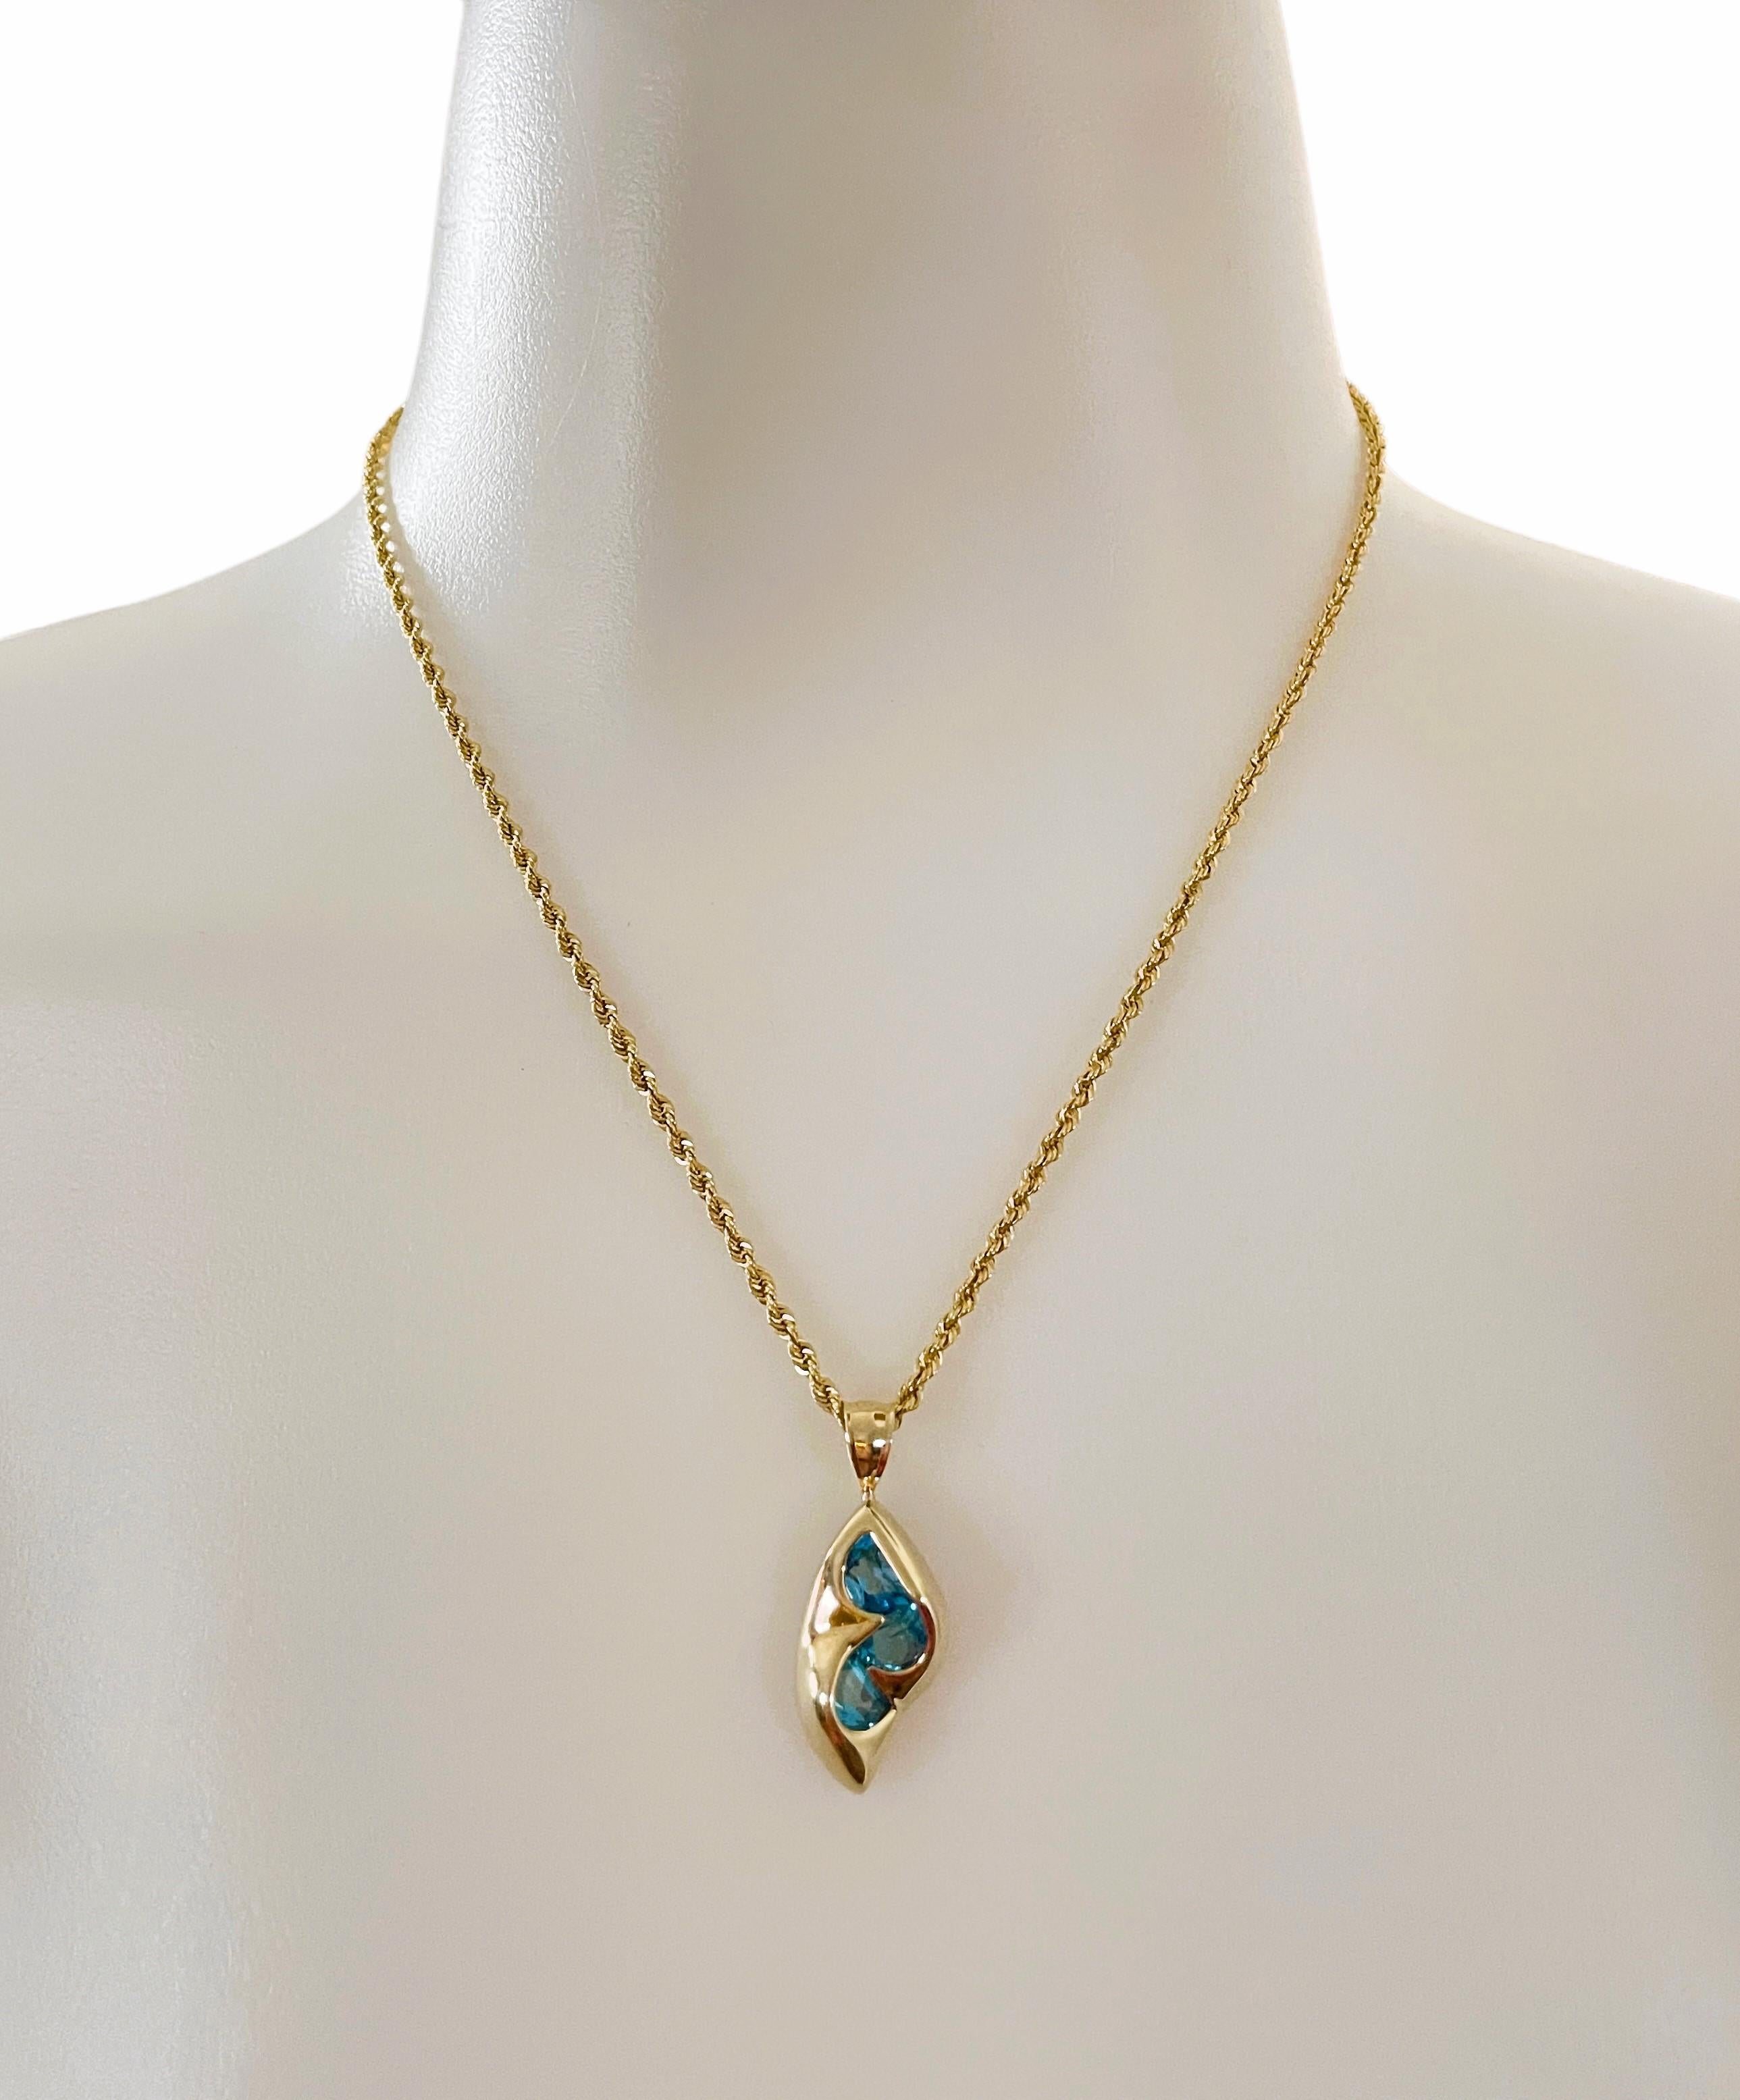 14k Yellow Gold Handmade Fancy Cut Blue Topaz Pendant with Appraisal For Sale 5